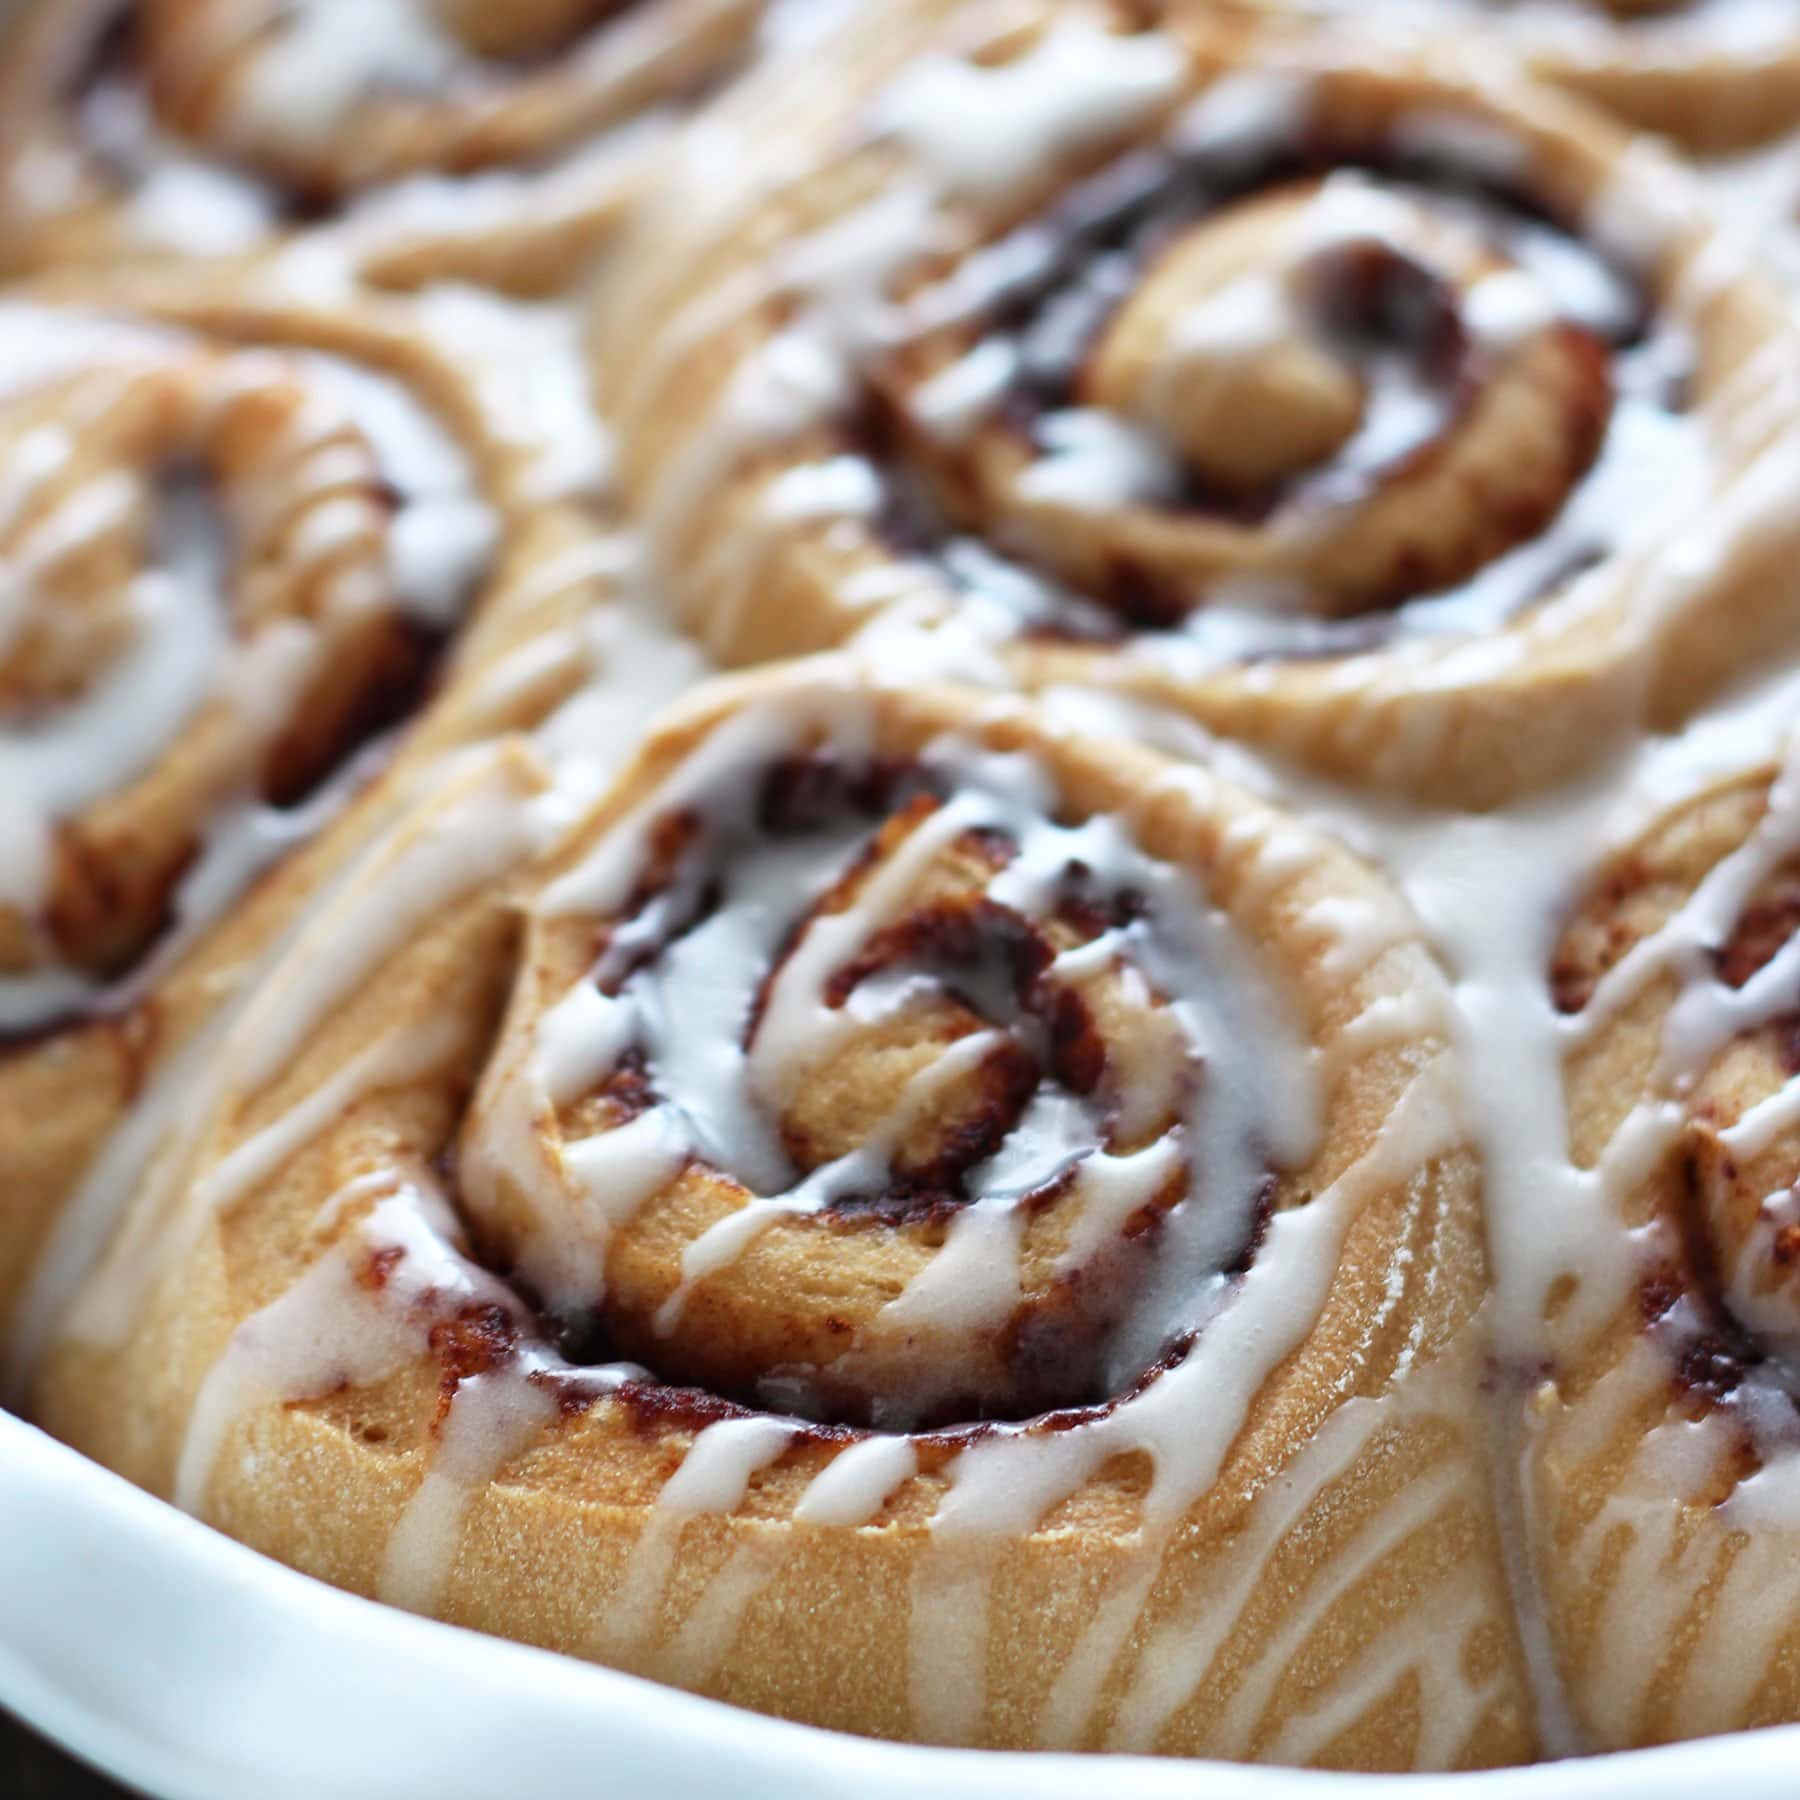 Easy overnight cinnamon rolls made healthier with whole wheat flour, less butter, and less sugar!